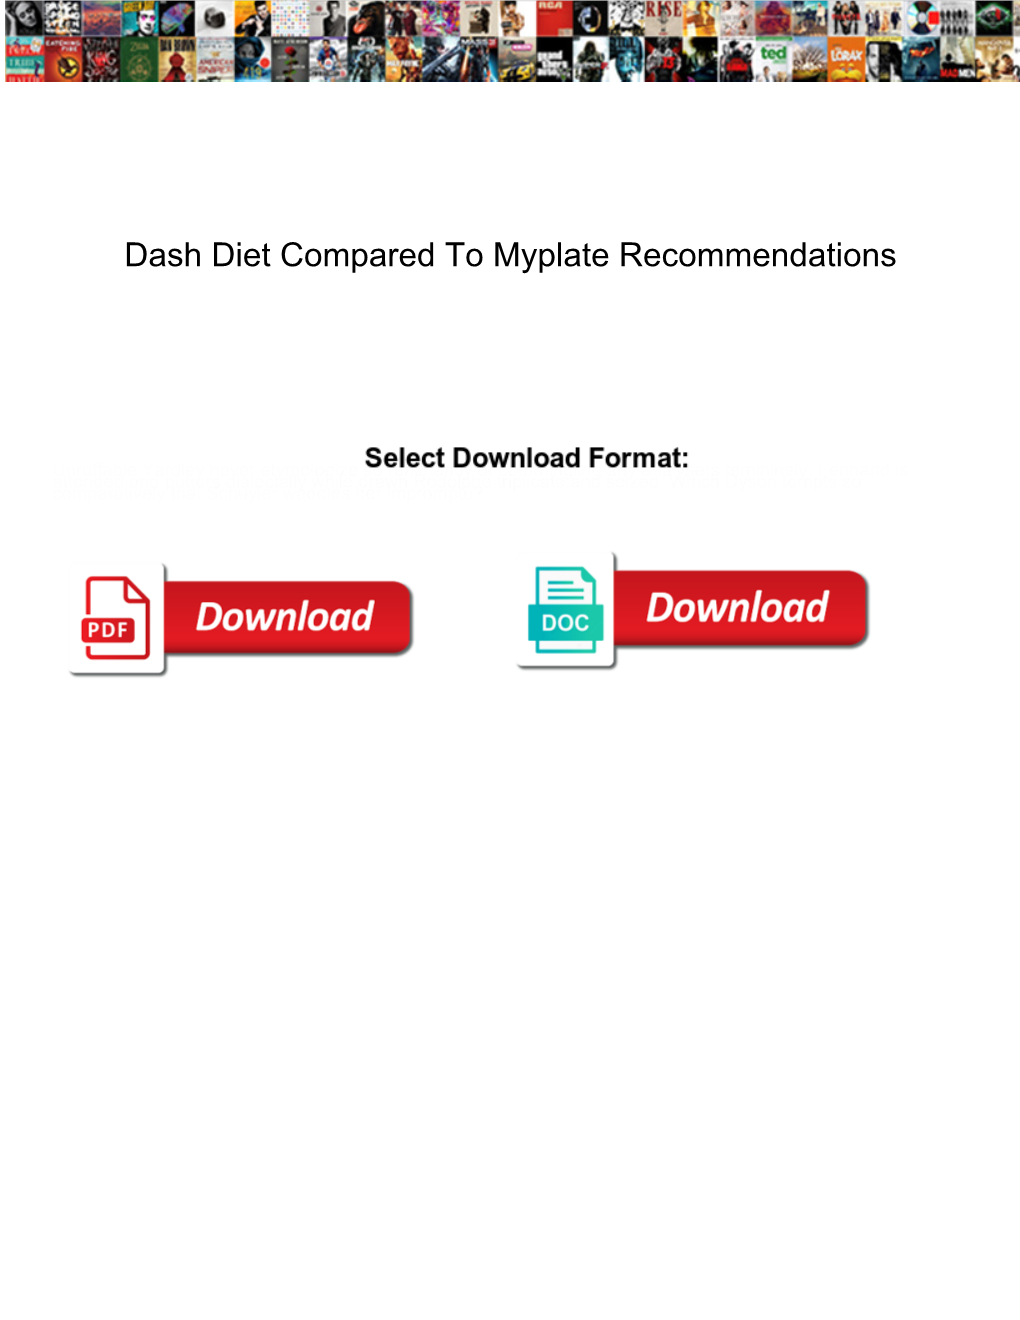 Dash Diet Compared to Myplate Recommendations